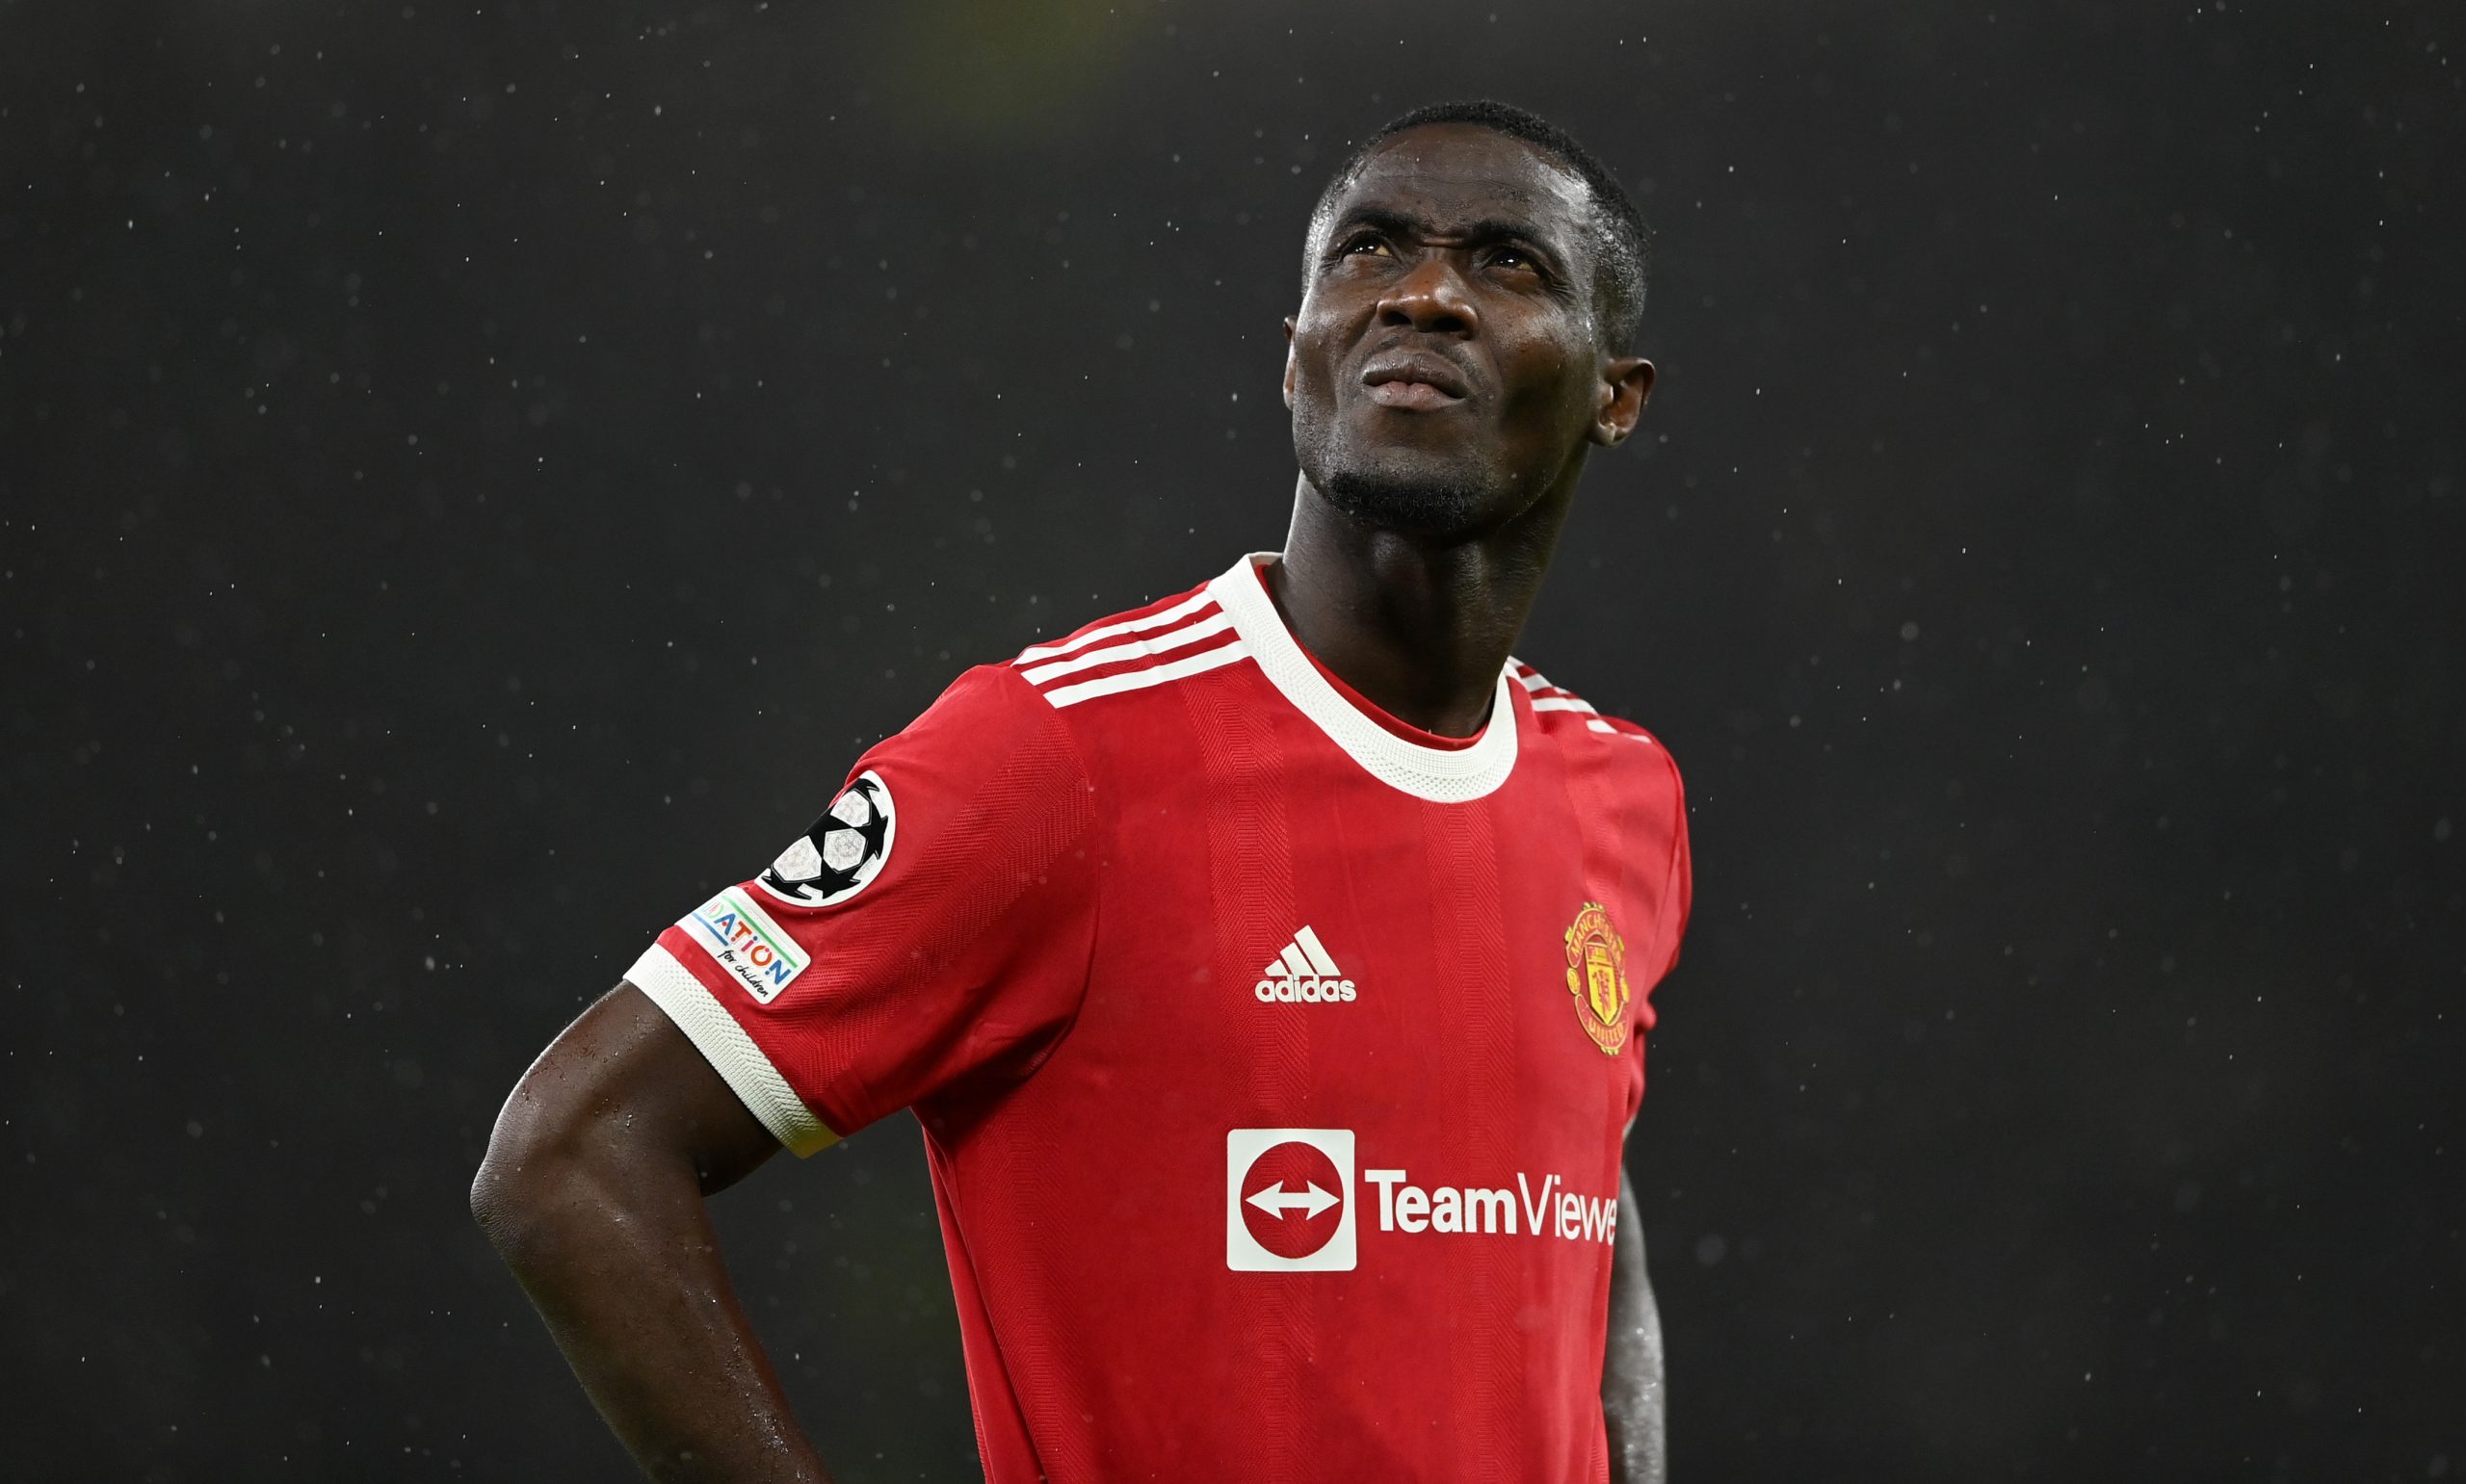 Eric Bailly to leave Manchester United for Marseille "this week"